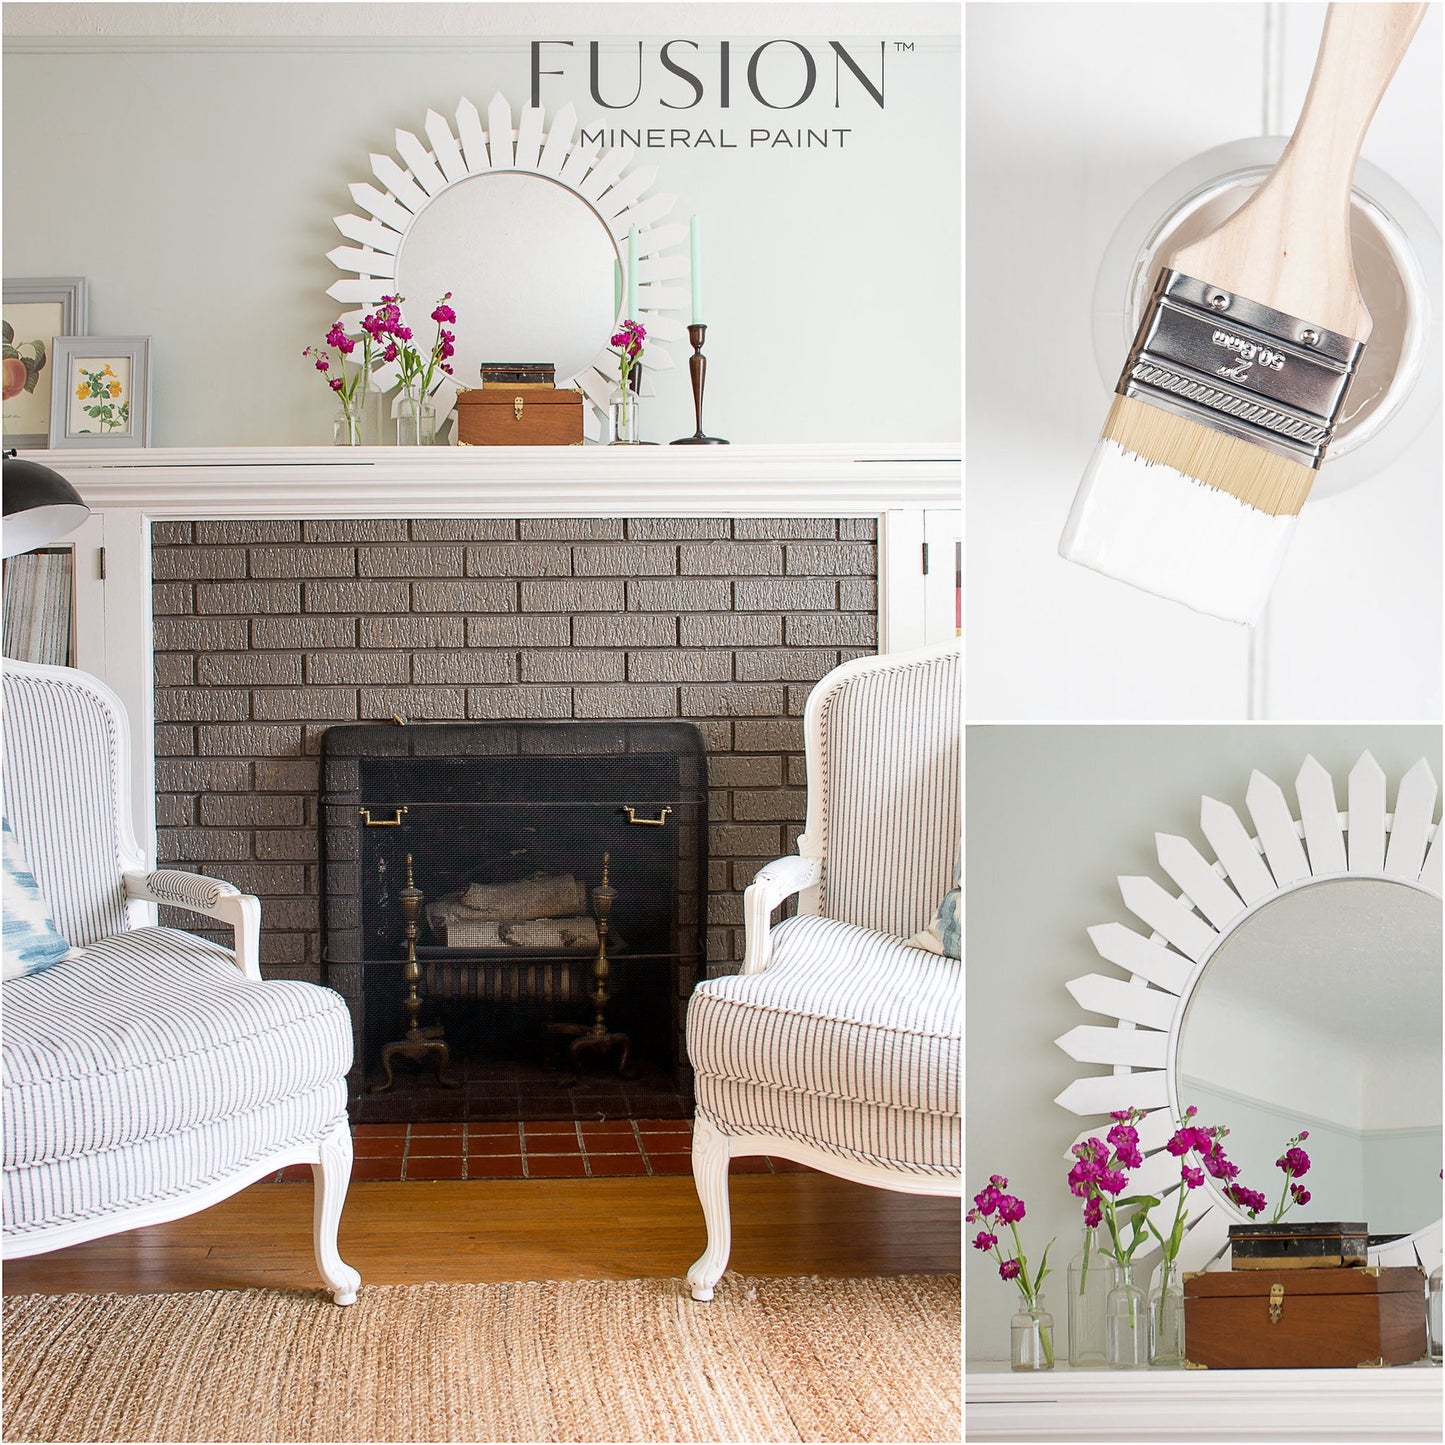 Picket Fence - Fusion Mineral Paint Paint > Fusion Mineral Paint > Furniture Paint